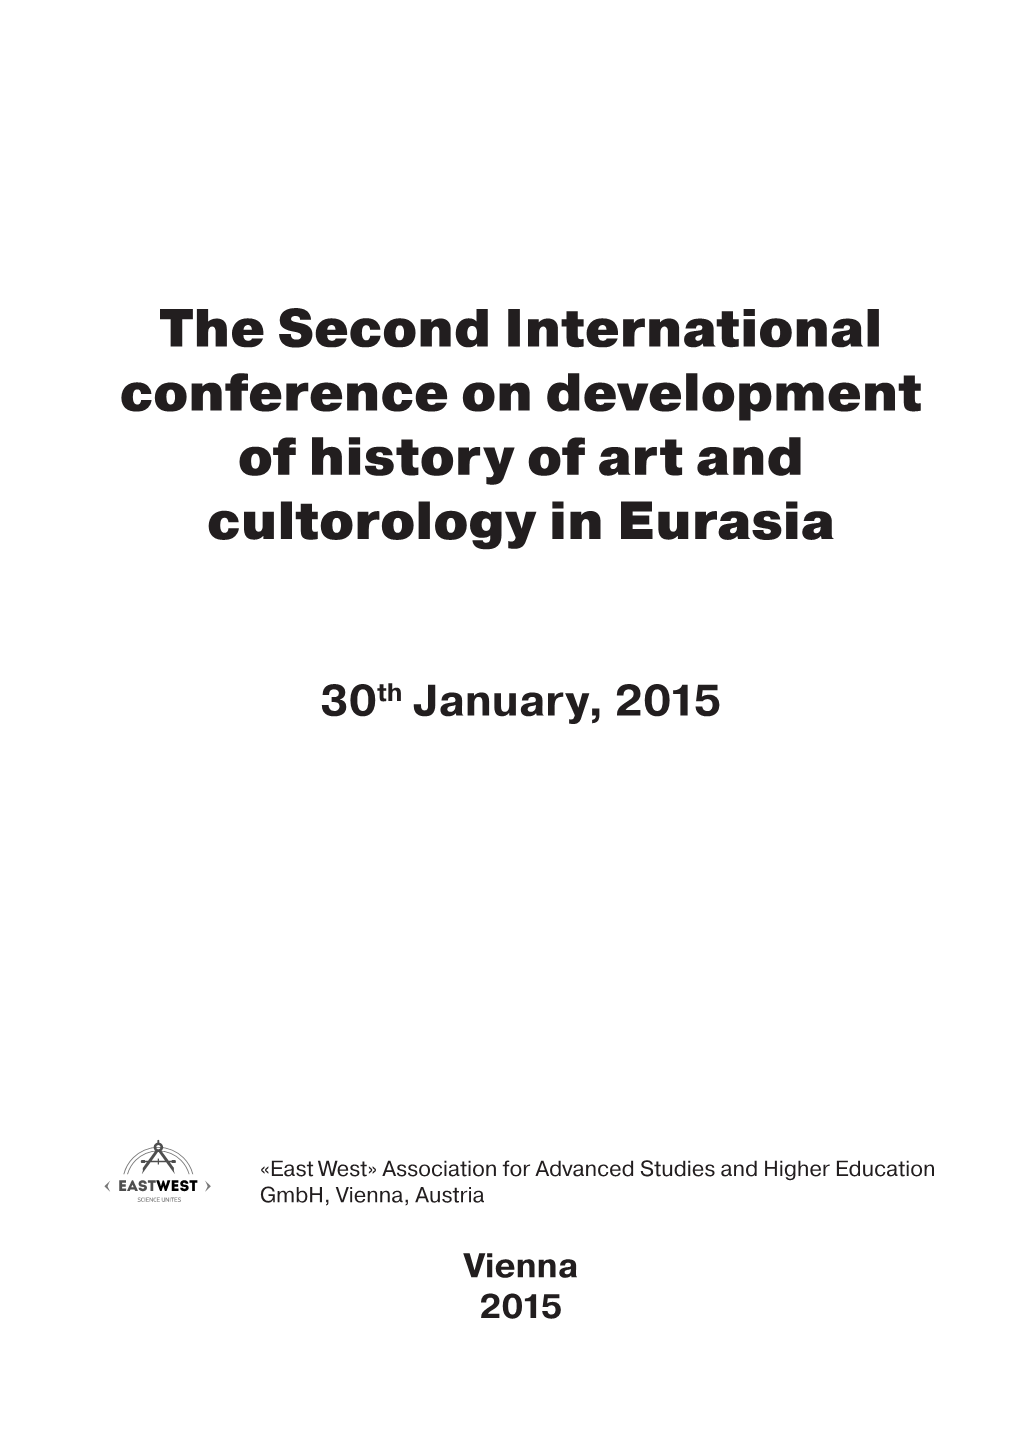 The Second International Conference on Development of History of Art and Cultorology in Eurasia